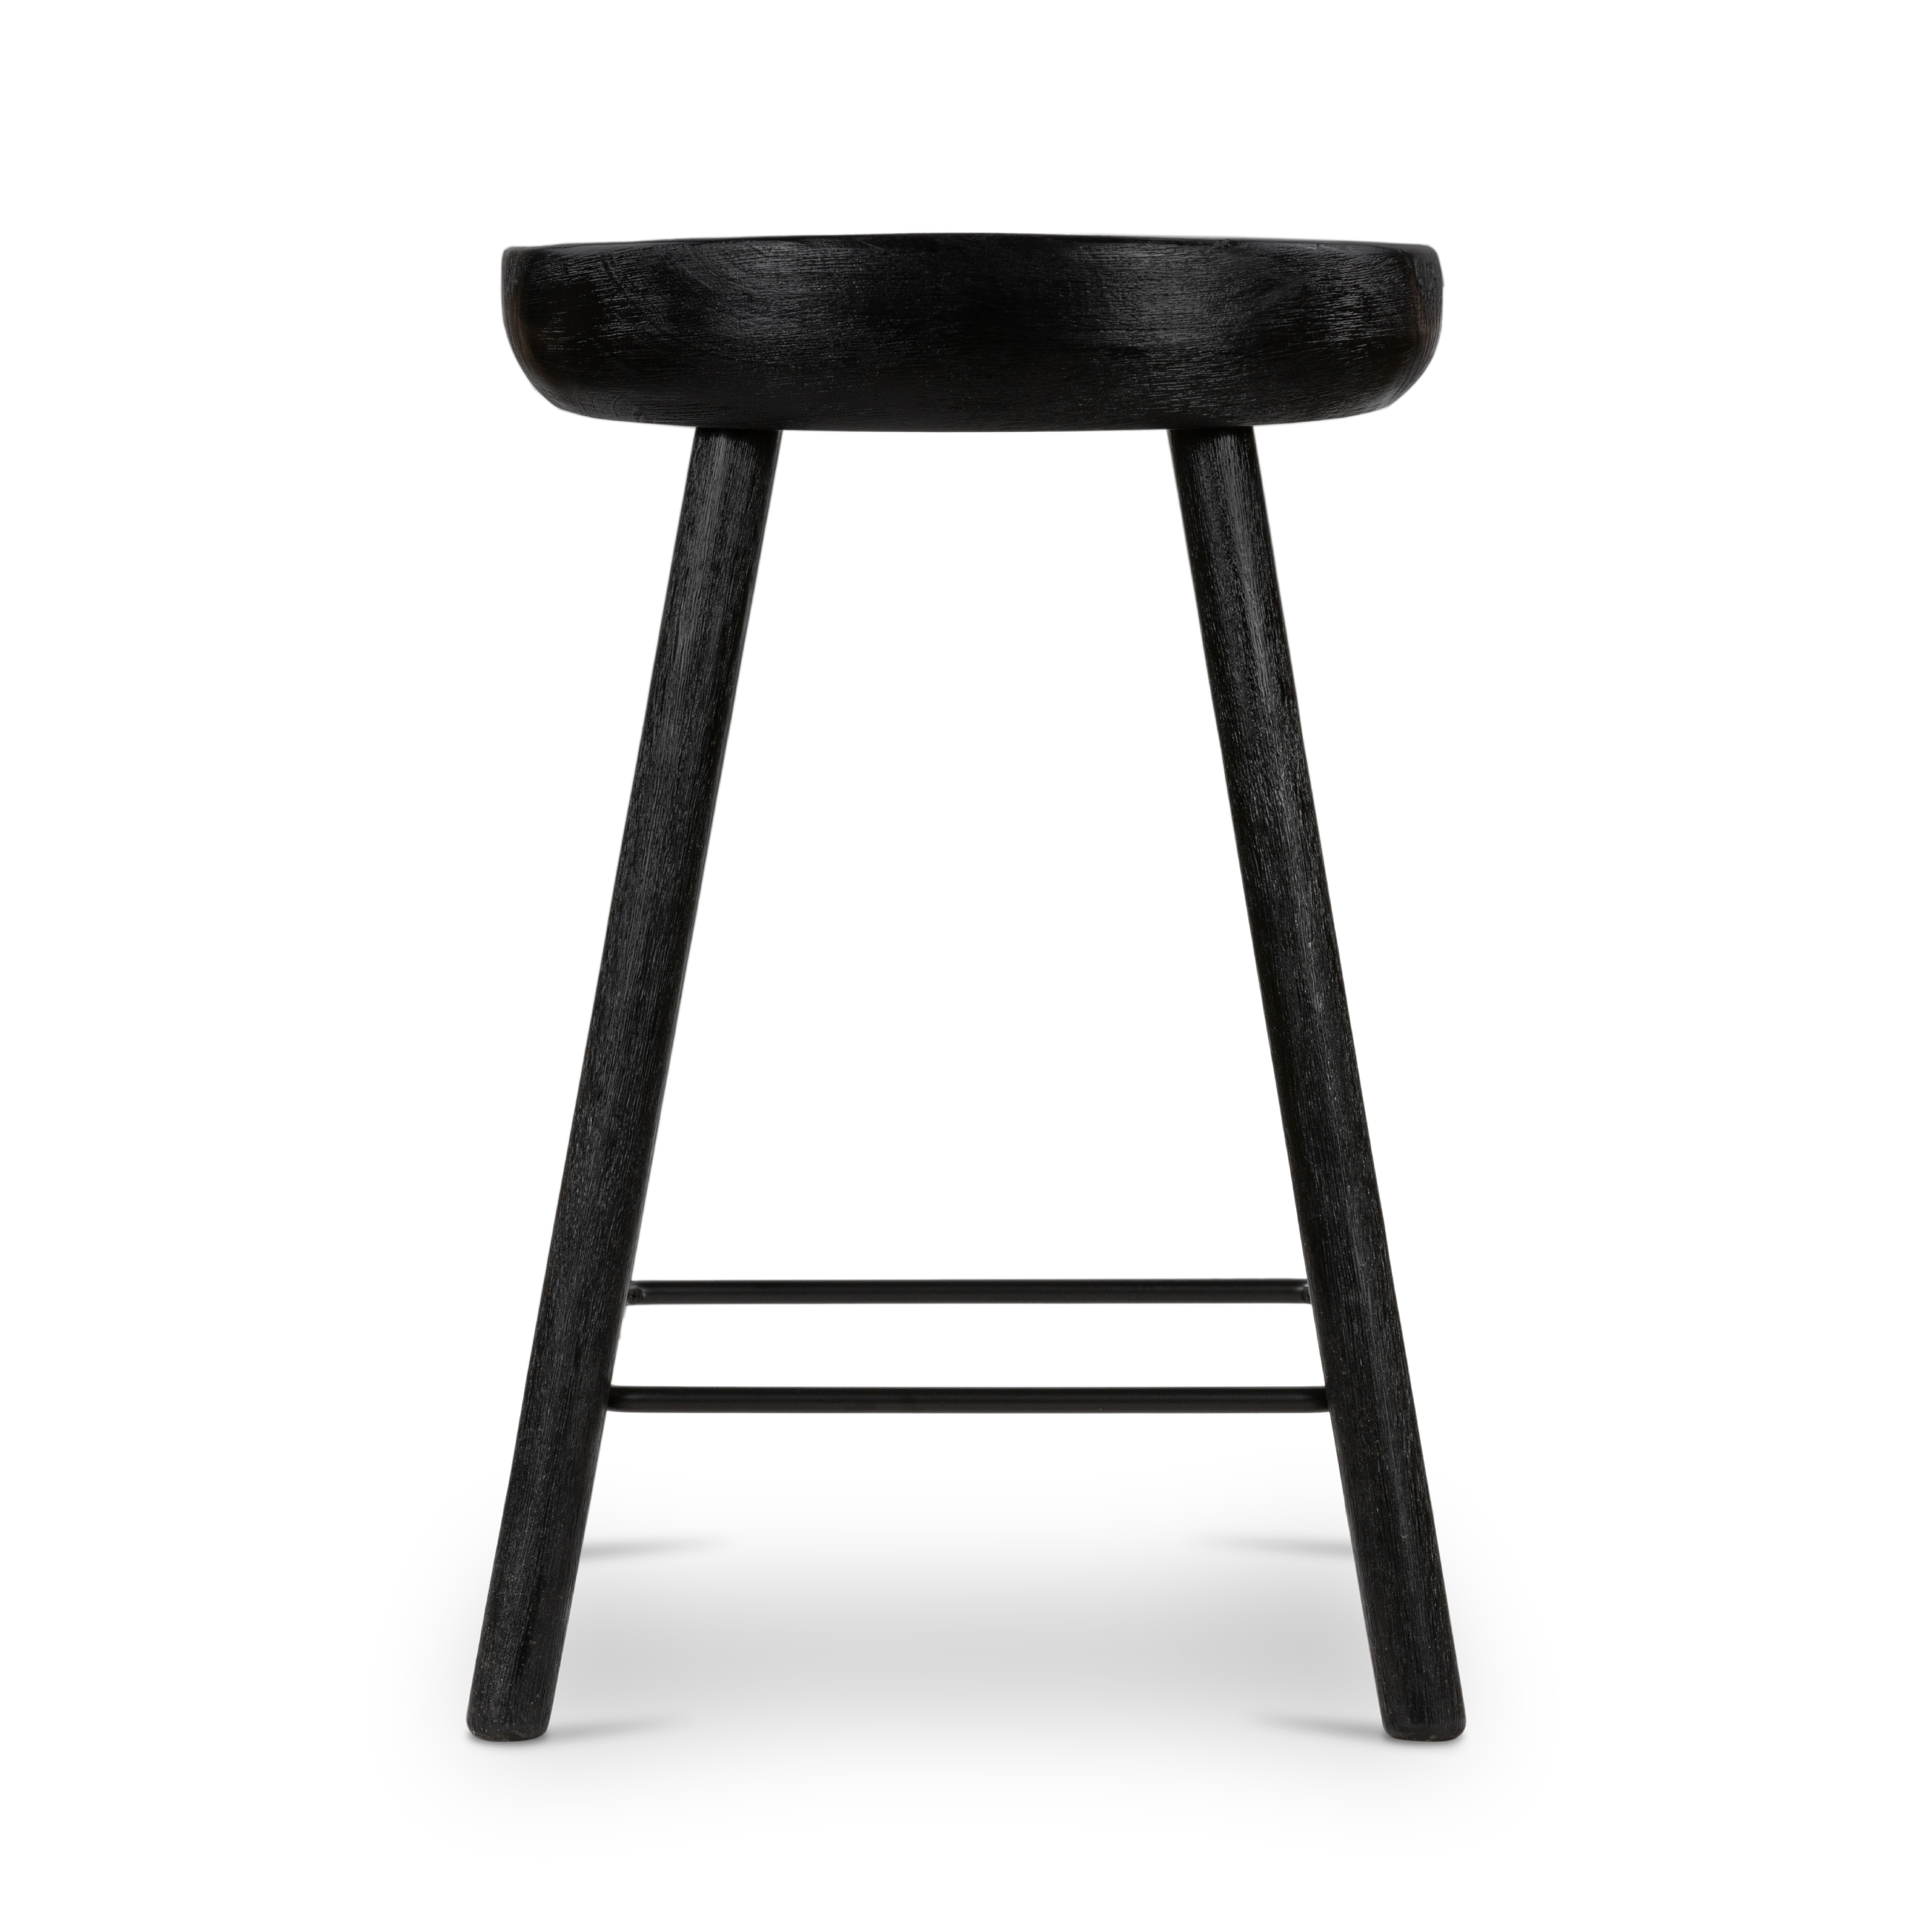 The Barrett Matte Black Bar and Counter Stool is sculpted for comfort. Crafted from rich parawood, black iron stretchers lend an updated look to simply styled bar or counter seating finished in a sleek matte black. Amethyst Home provides interior design, new construction, custom furniture, and rugs for the Winter Park and Orlando, Florida metro area.